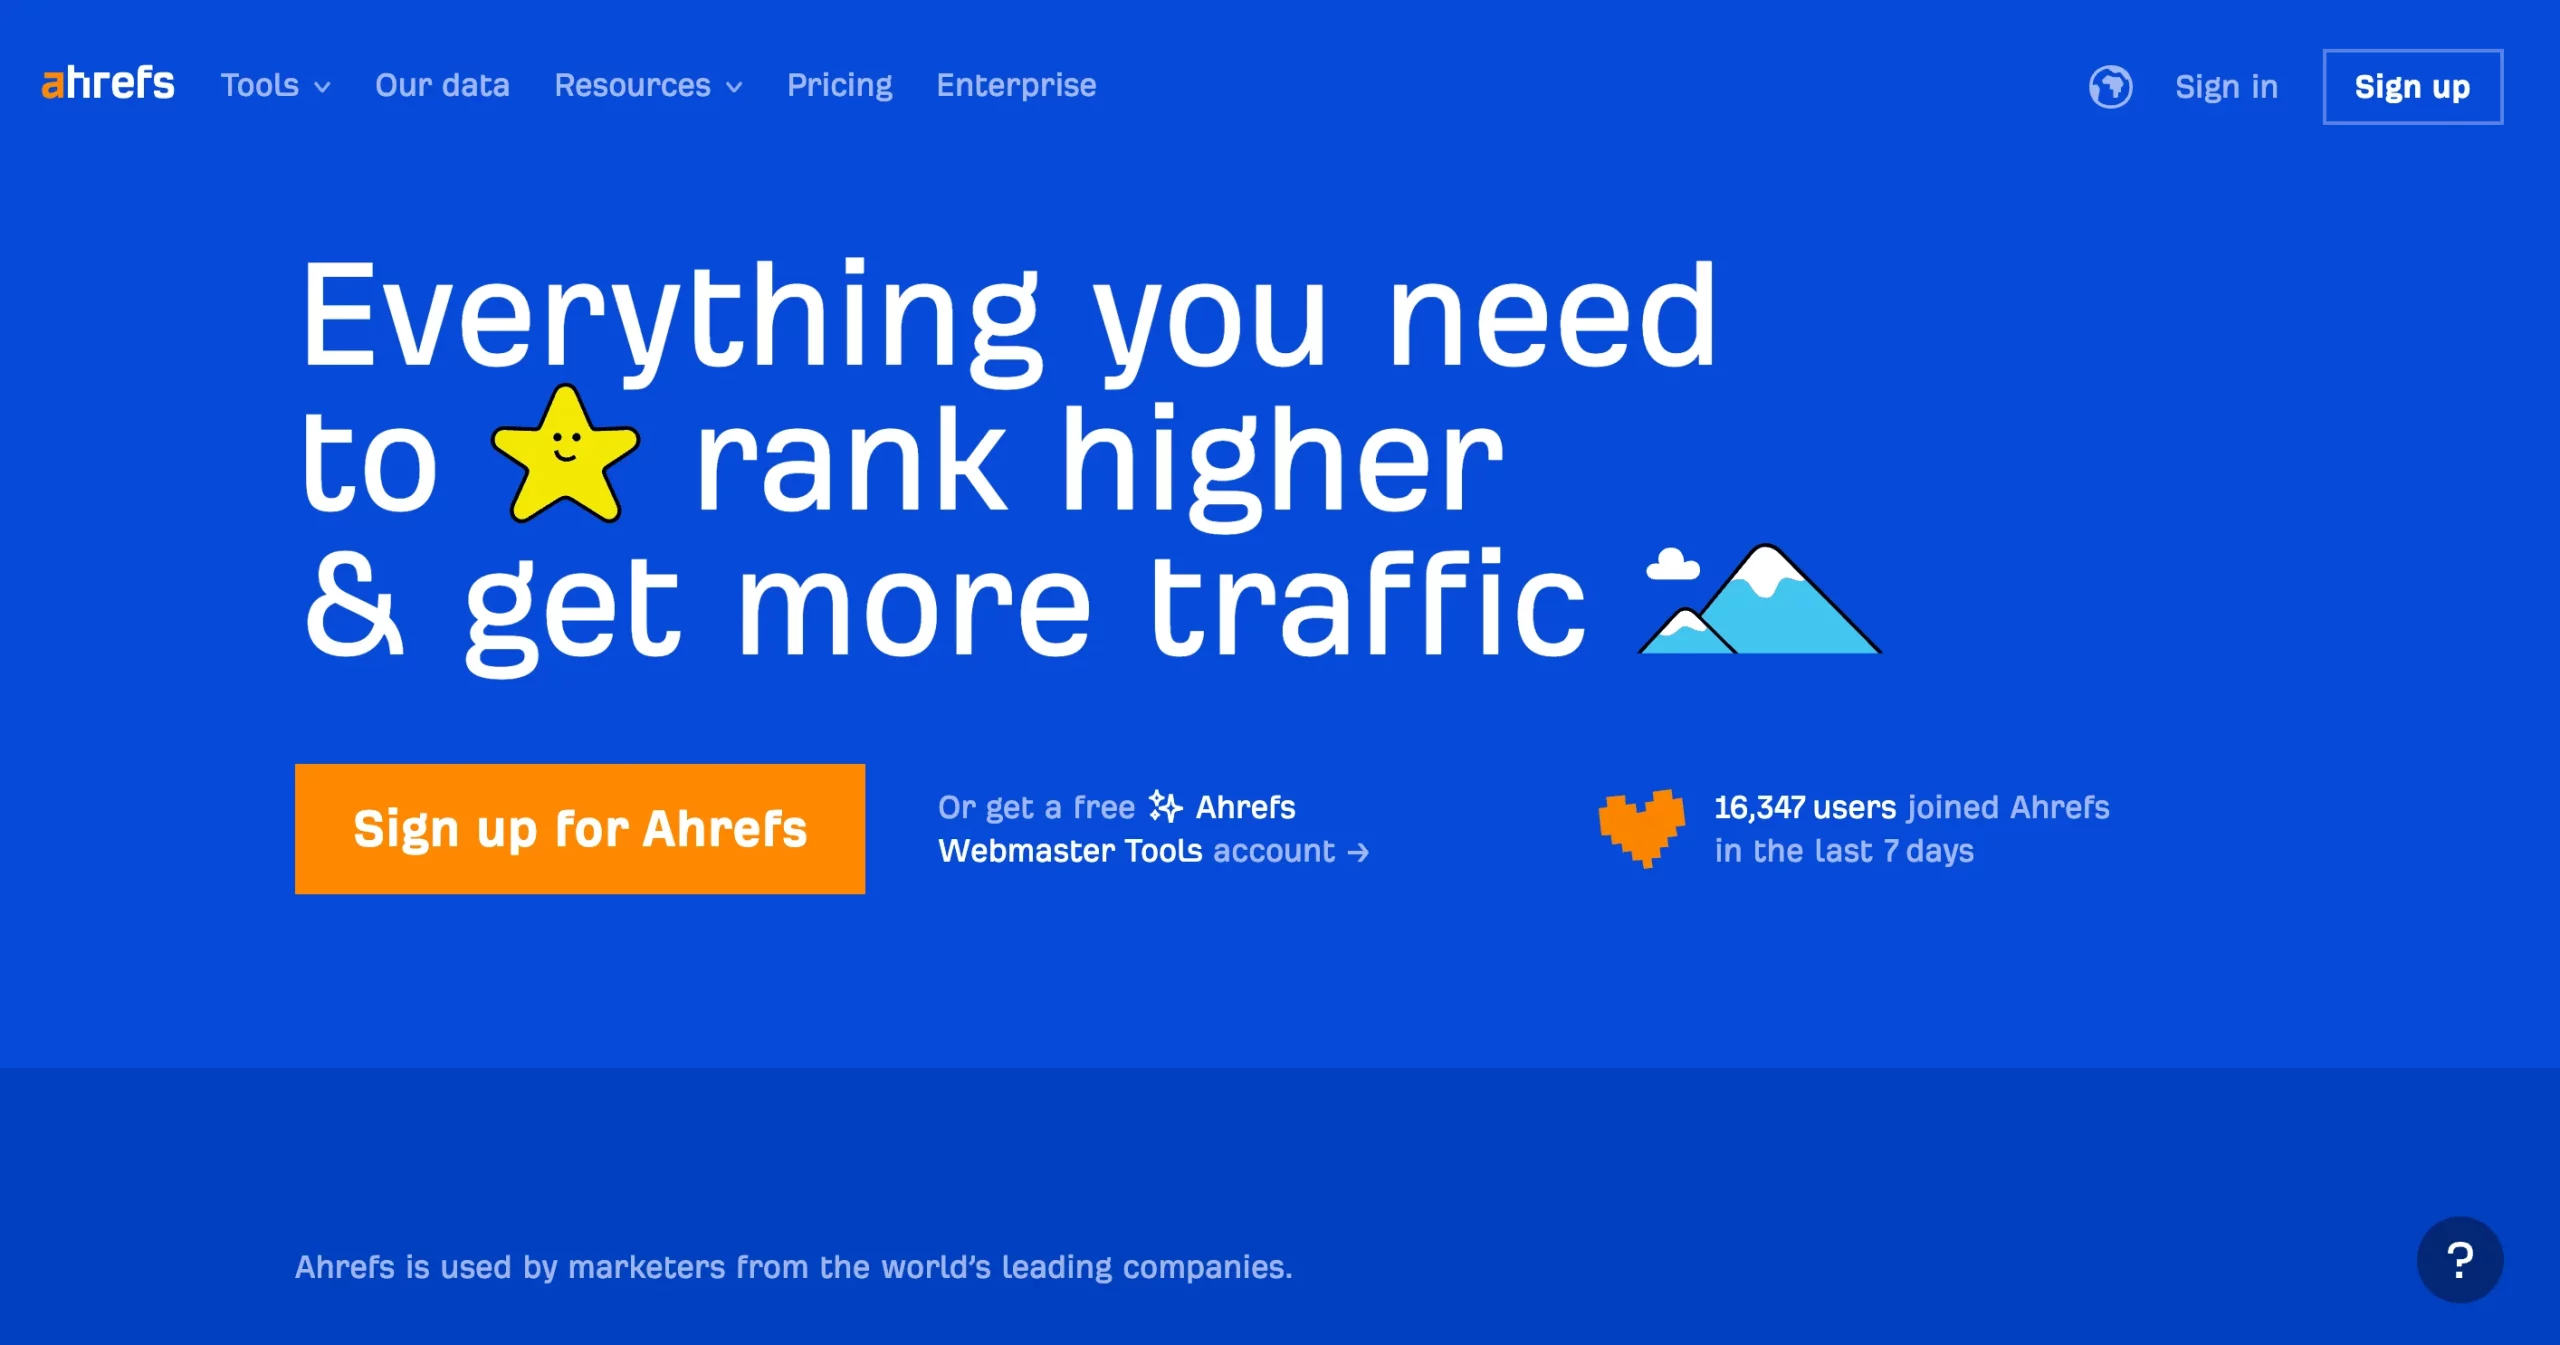 2. Ahrefs | The All-in-One SEO Toolset